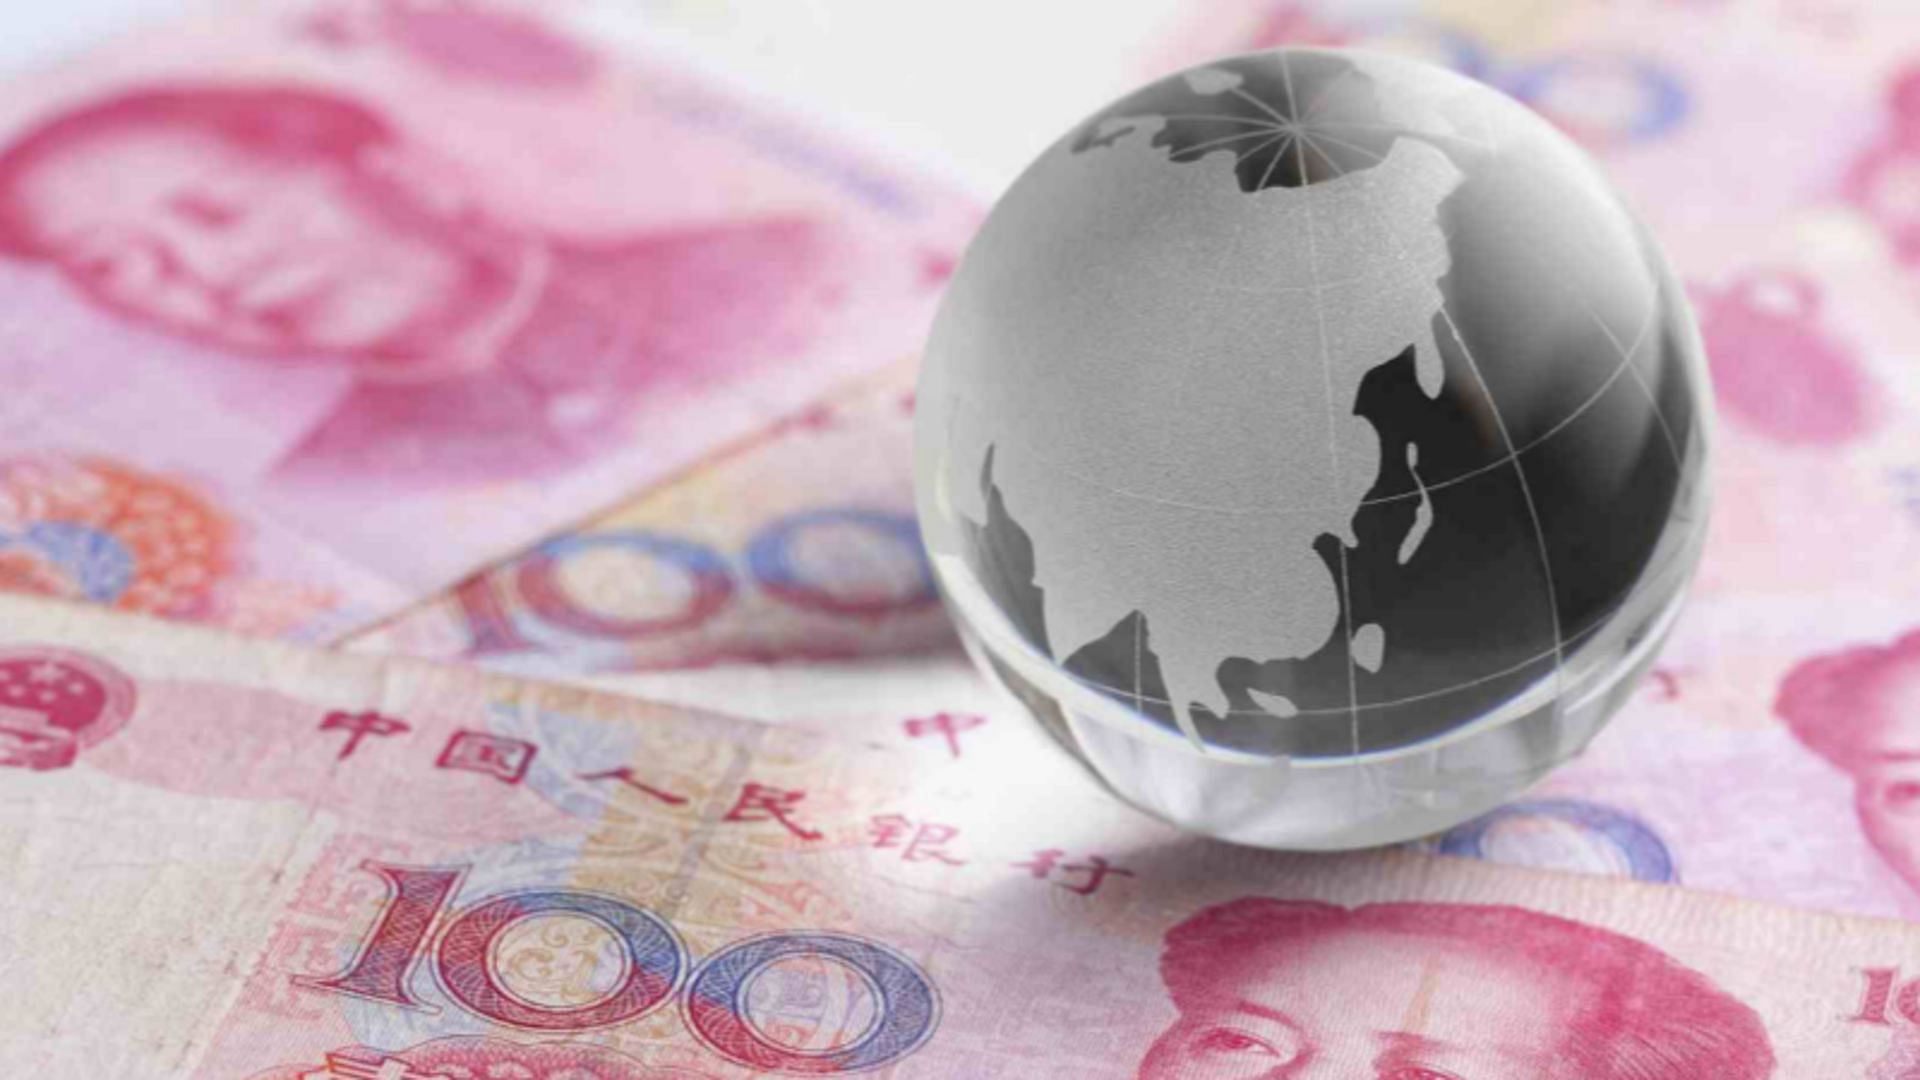 Chinese central bank devalued the yuan as concerns on growth slowdown escalated (Photo: iStock)